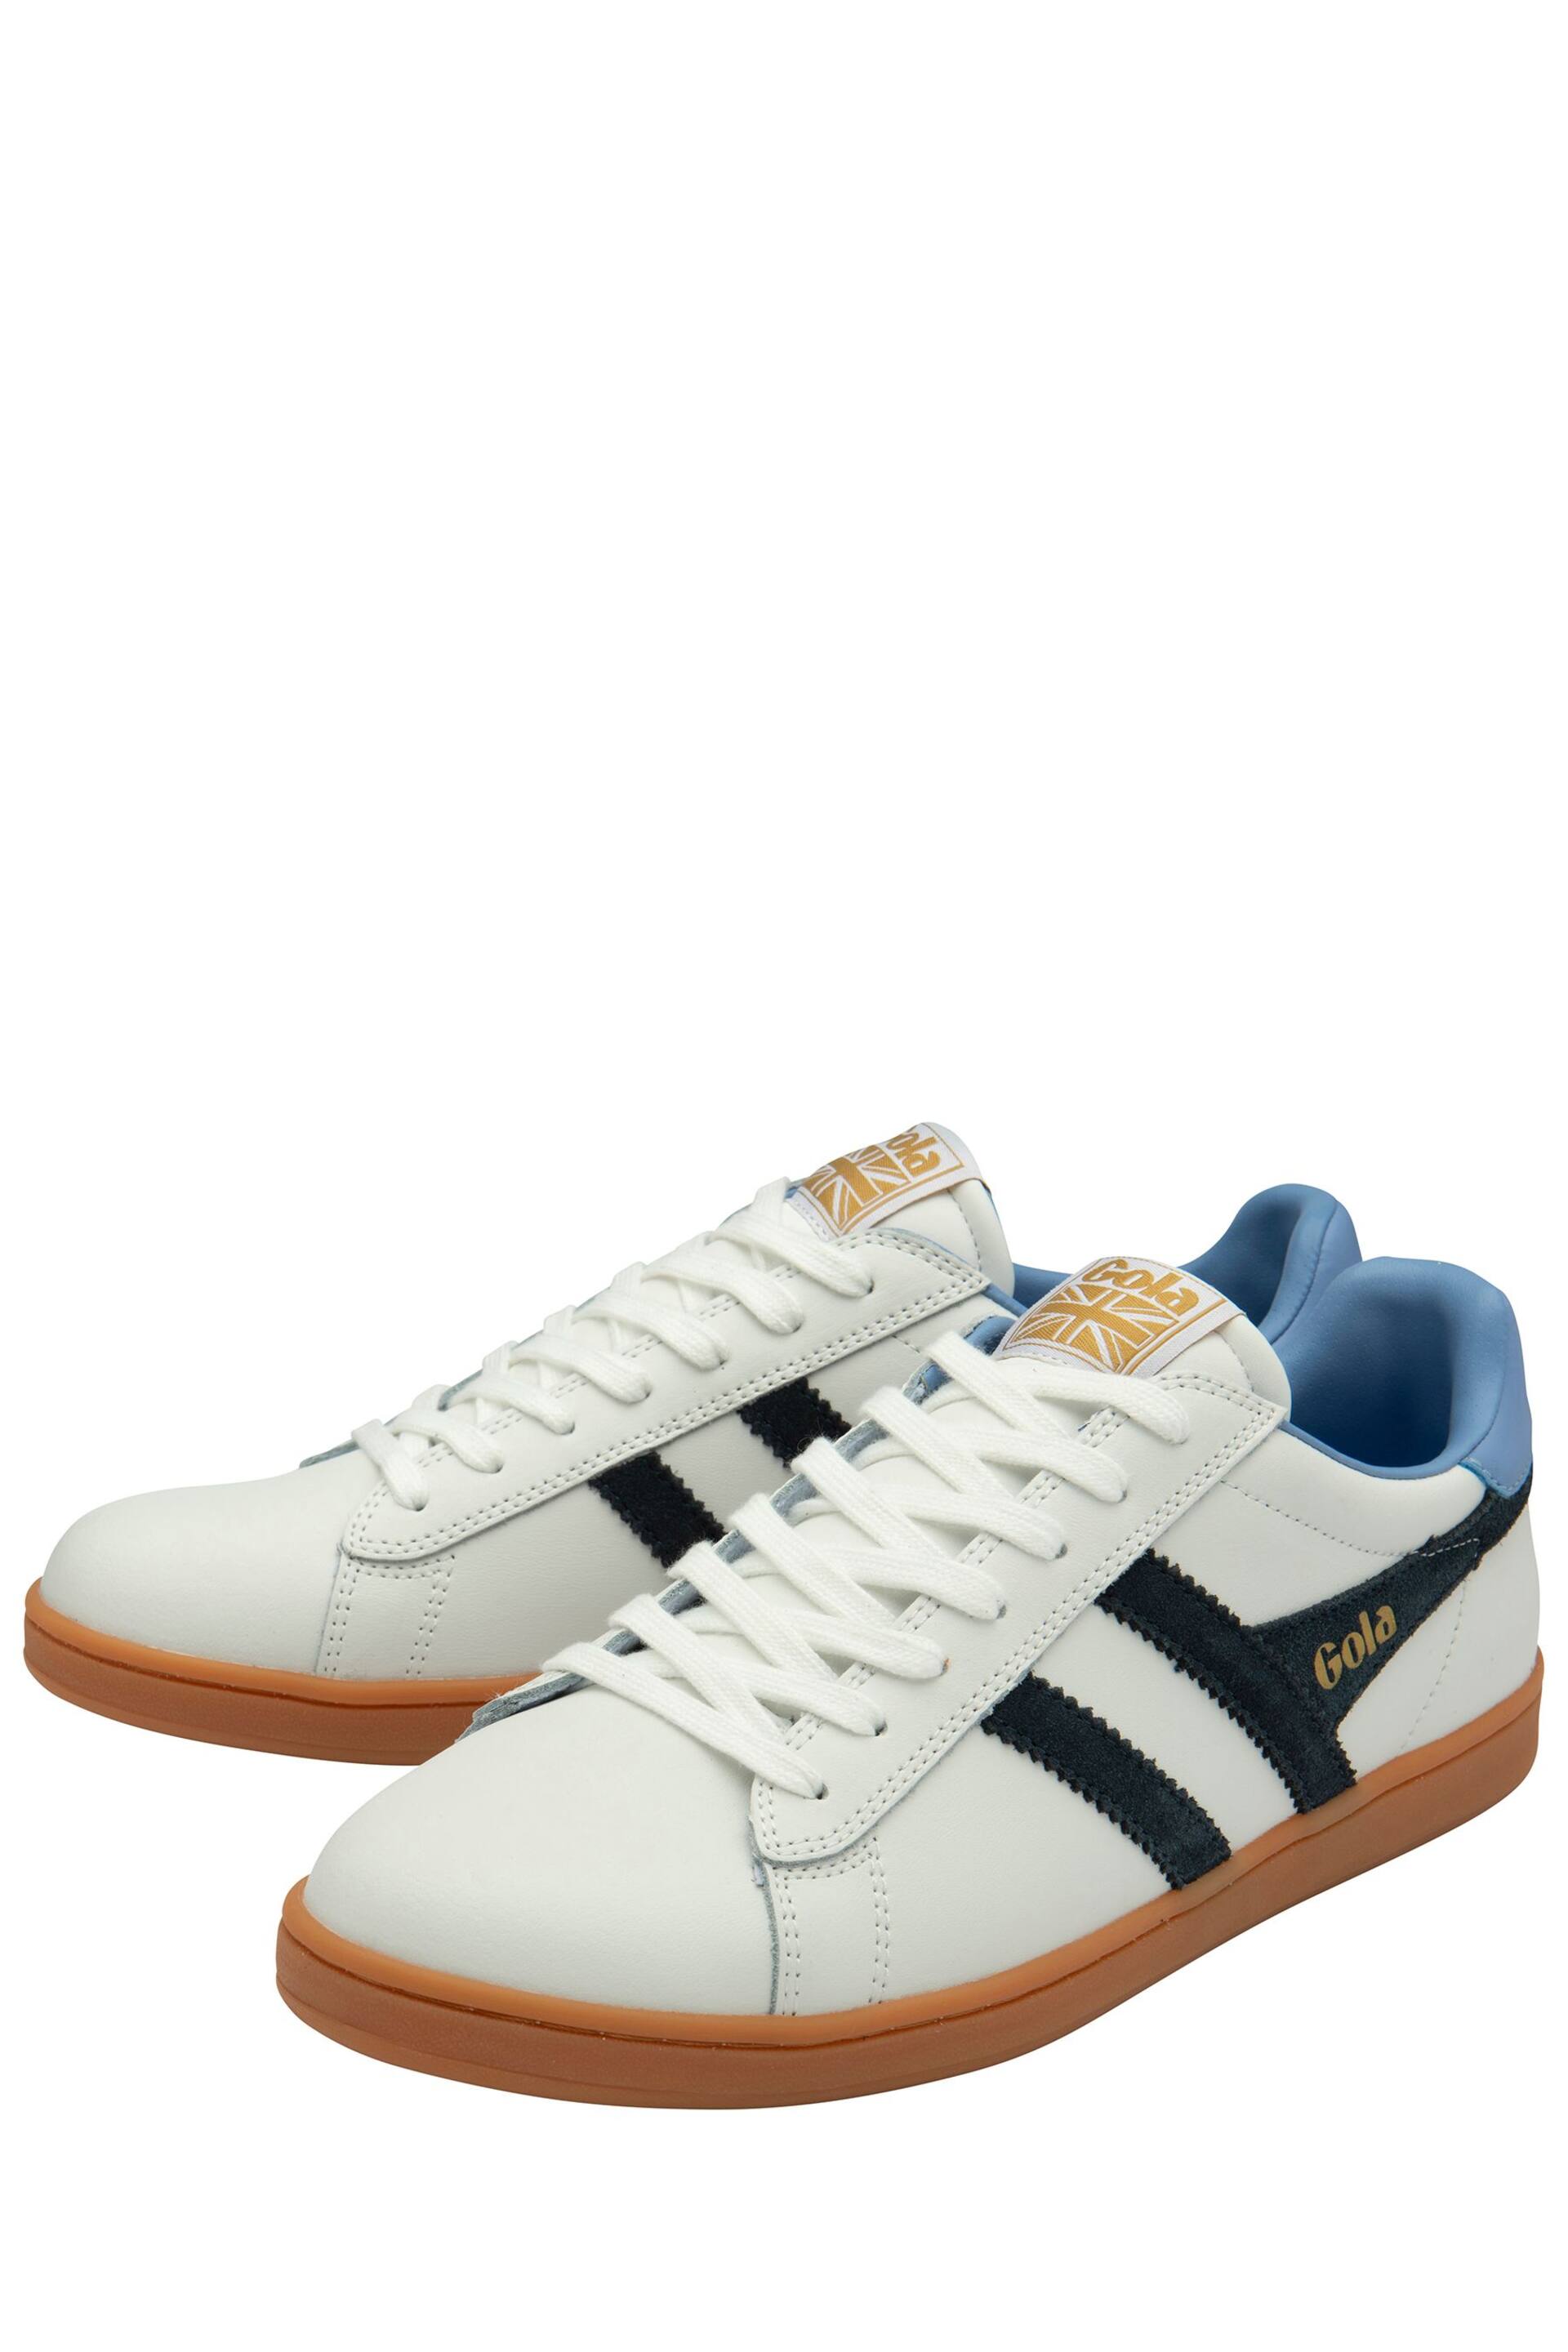 Gola White Men's Equipe II Leather Lace-Up Trainers - Image 2 of 4